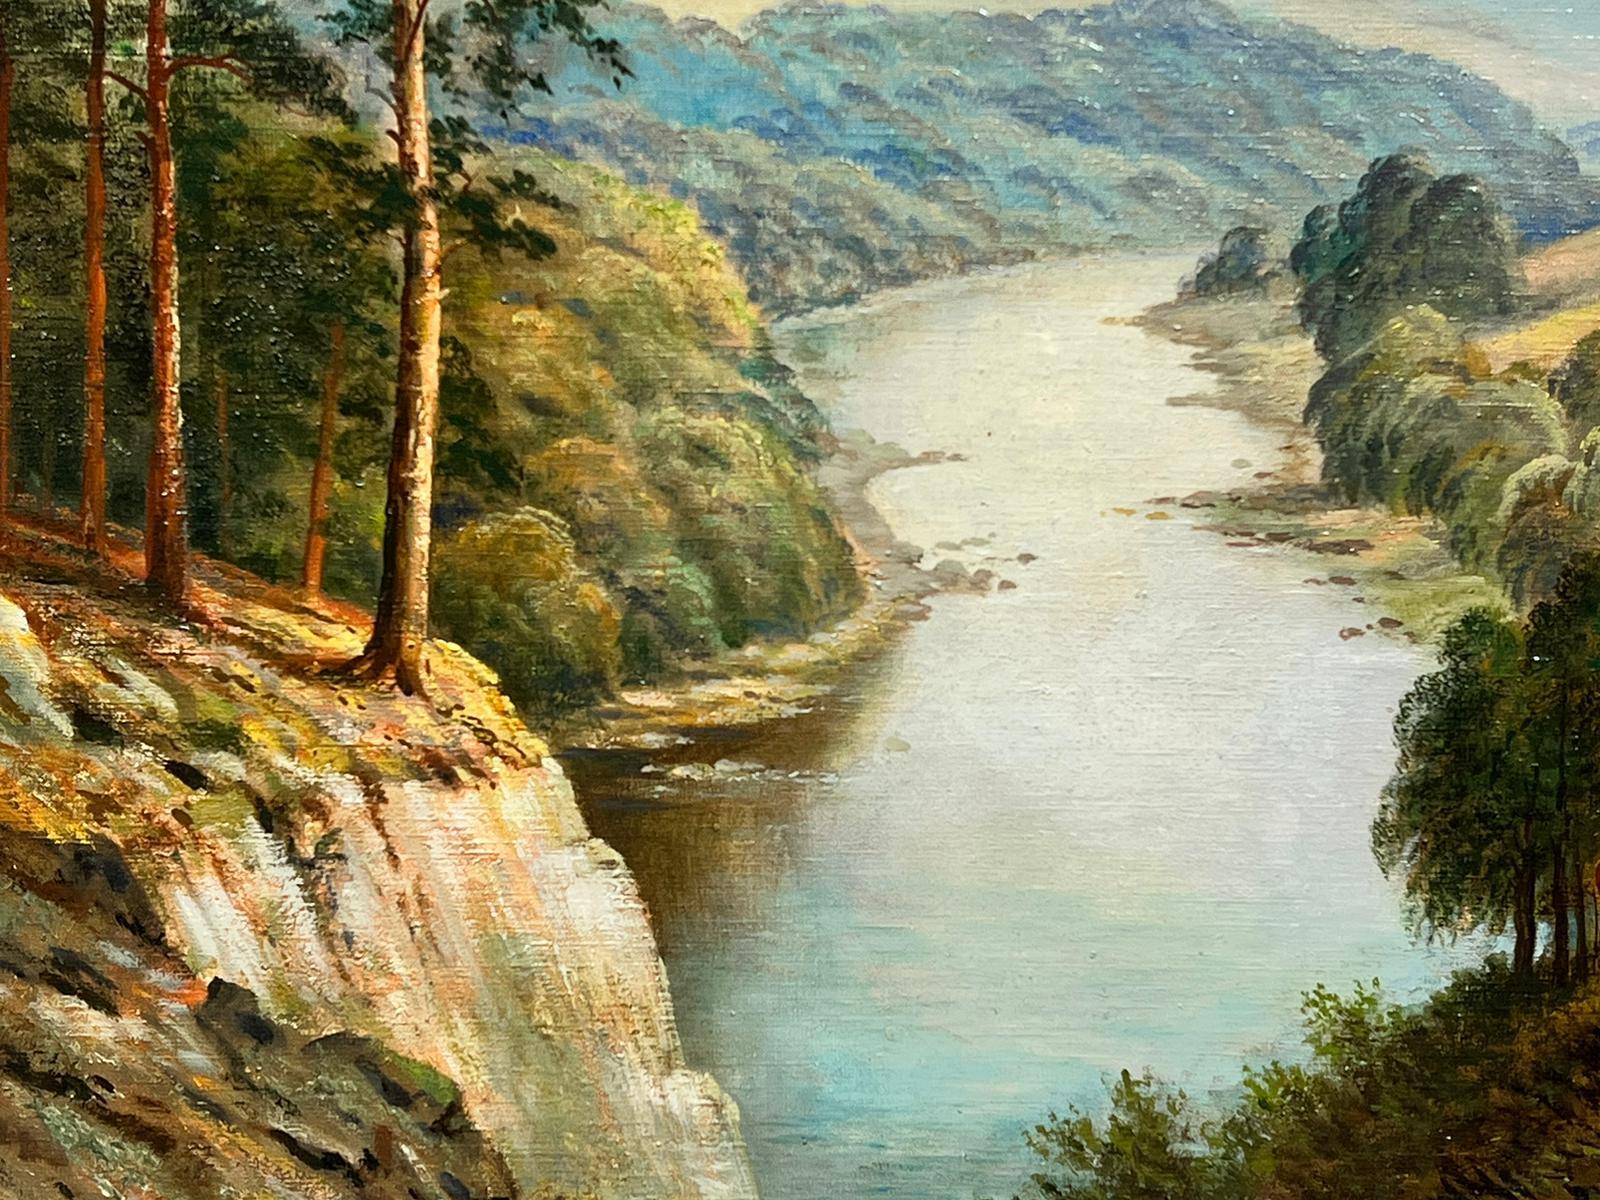 The Winding River Valley
by George Mulready Freezor (British, 1865-1962)
signed oil on canvas, framed
framed: 32 x 38 inches
canvas: 29 x 33 inches

provenance: private UK collection
The painting is in very good and presentable condition.
